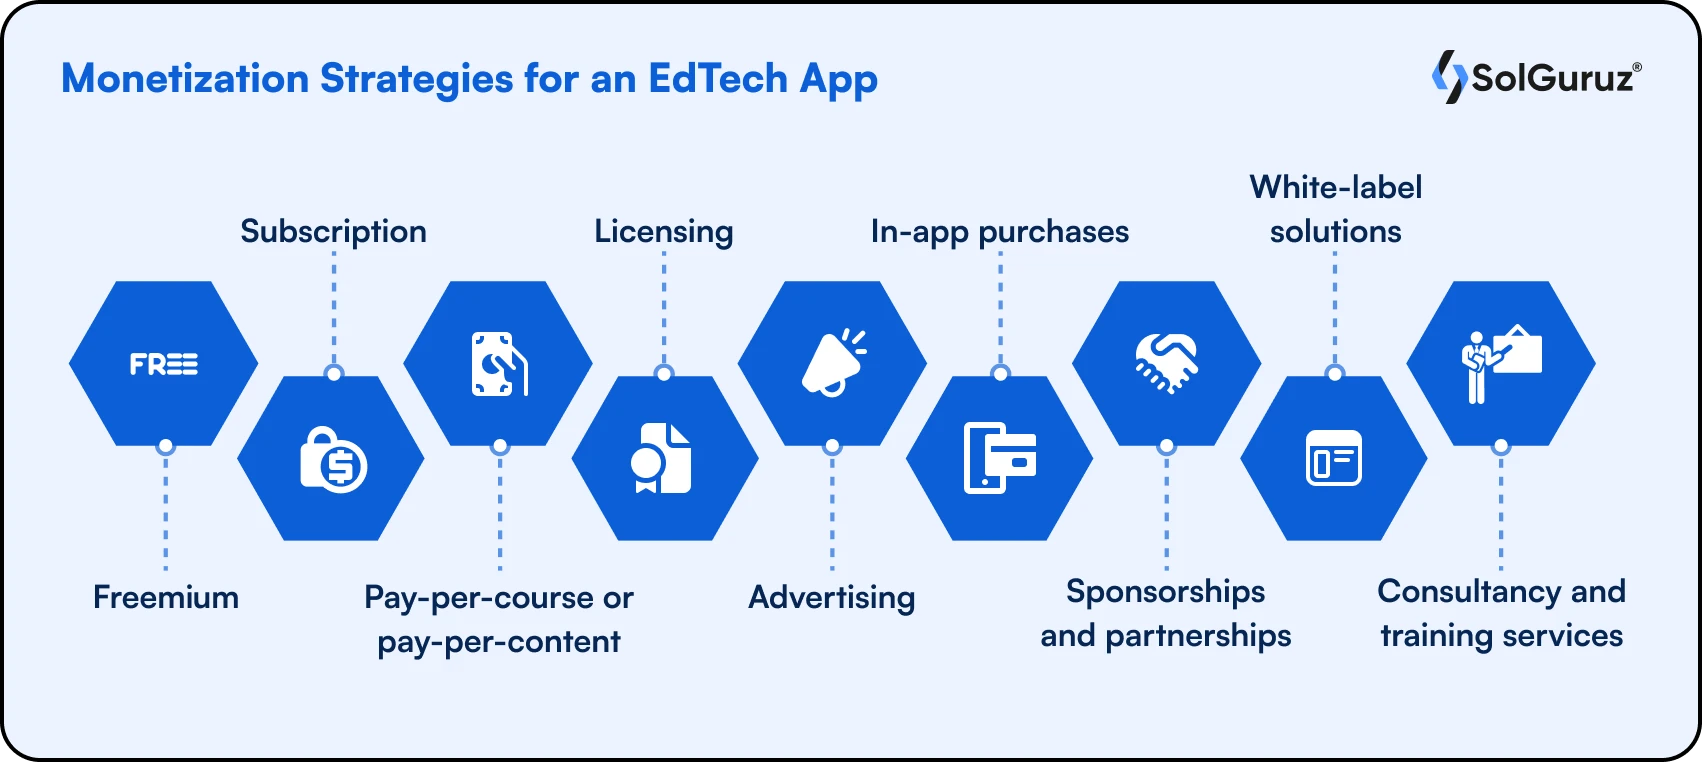 Education app development companies can adopt various business models to generate revenue while delivering education. In this image, we have listed out some popular EdTech business models aka revenue models for an education app